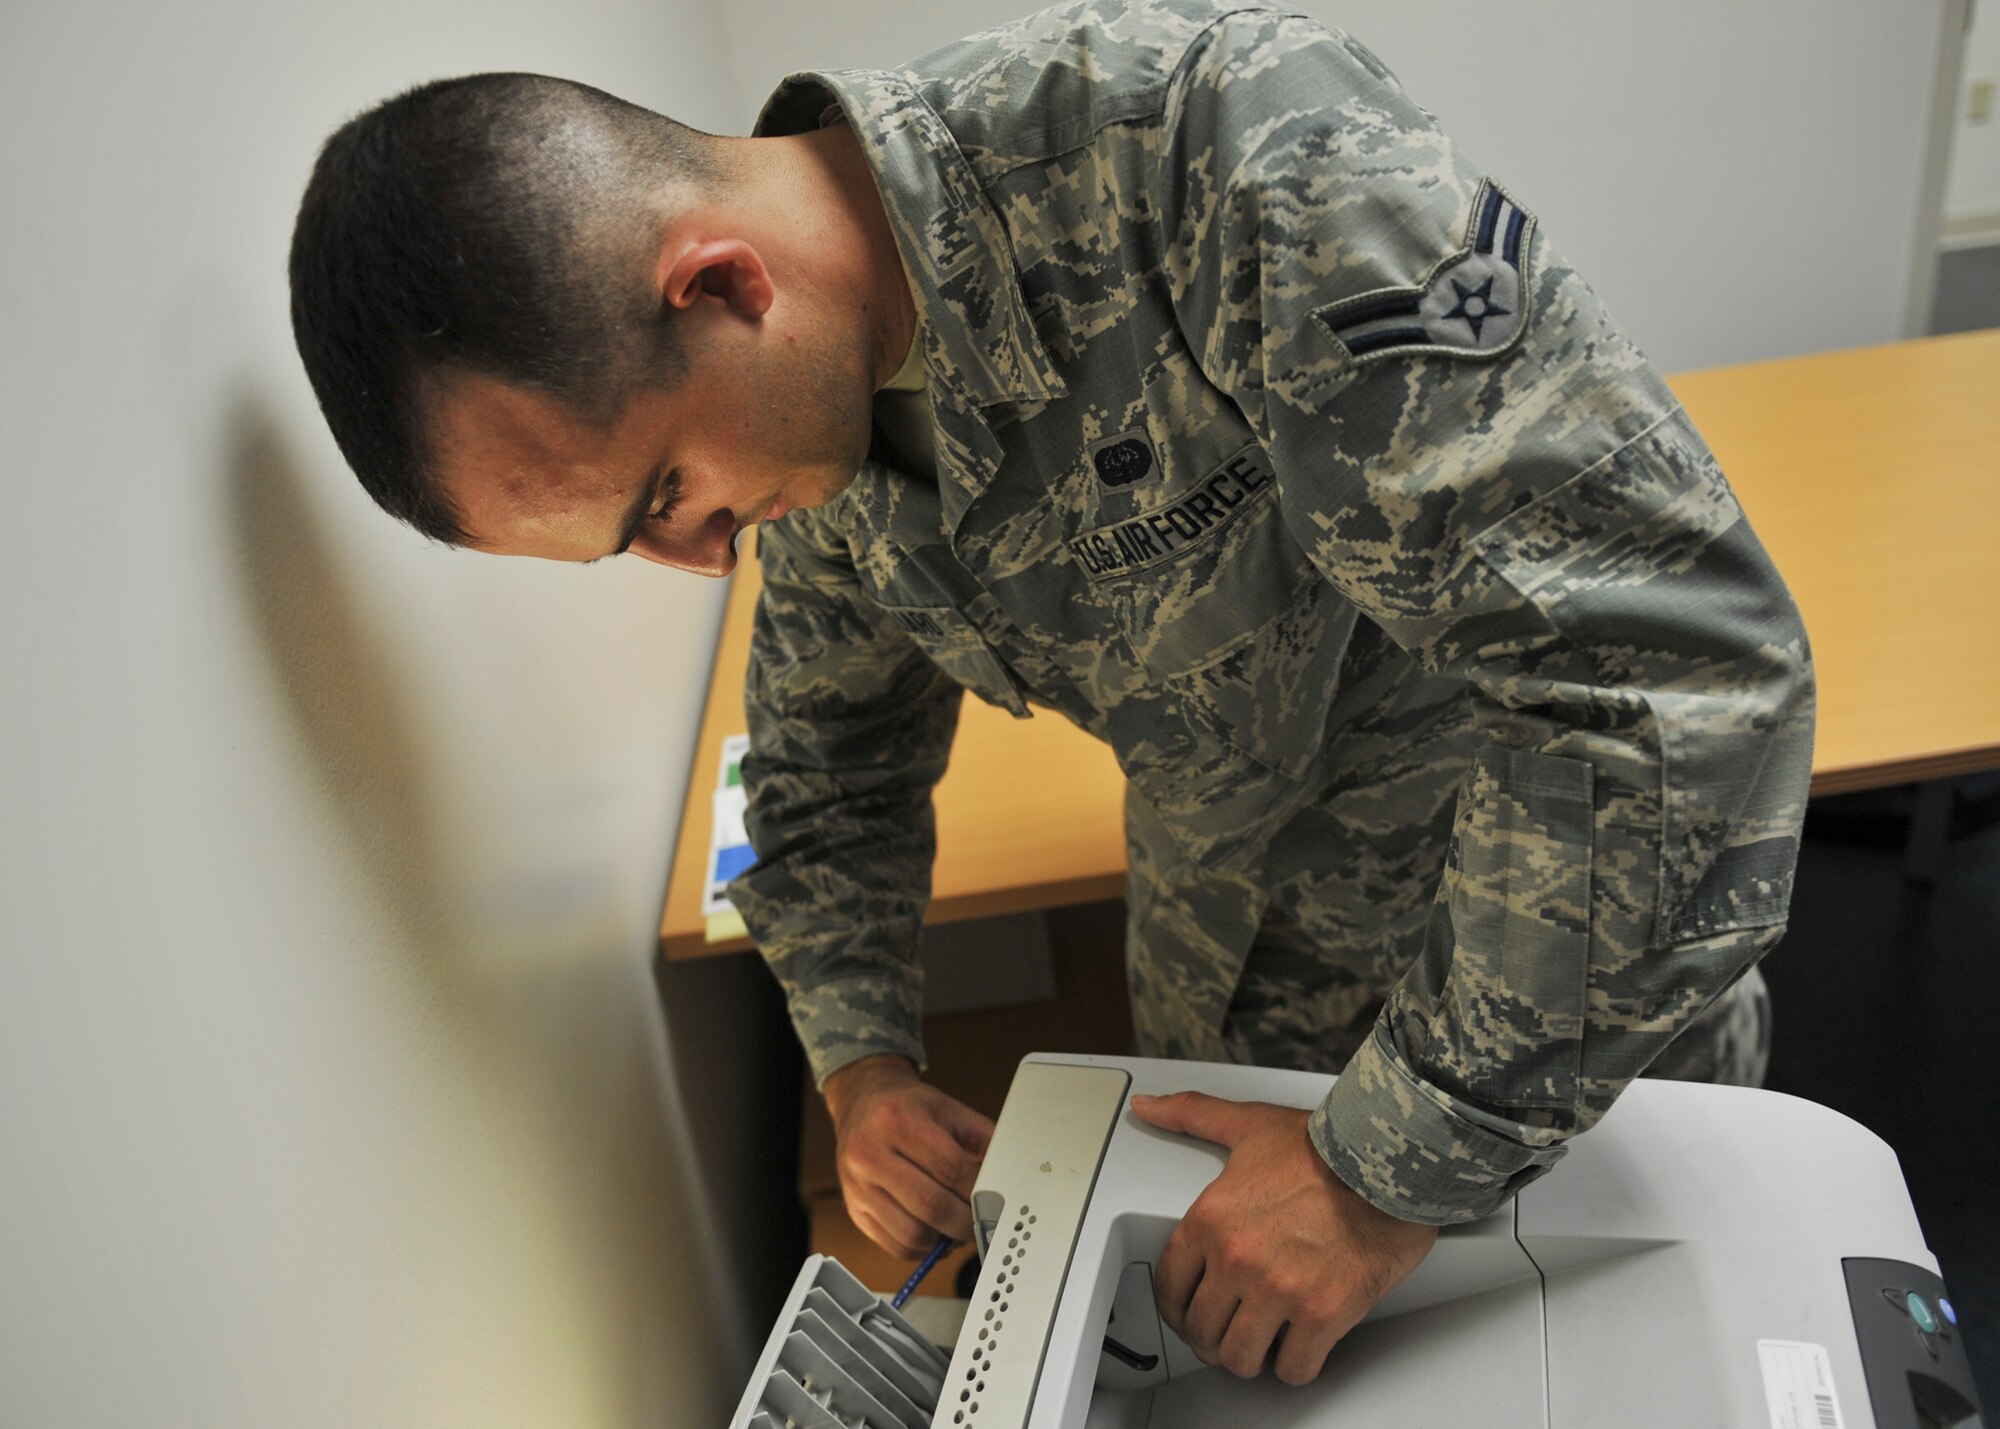 U.S. Air Force Airman 1st Class Mike Magliaro, 325th Communications Squadron client systems technician, performs maintenance on a printer in the 325th CS Annex on Tyndall Air Force Base, Fla., Aug. 3, 2016. As a new CST, Magliaro is still learning the job and is on his way to becoming a fully qualified technician. (U.S. Air Force photo by Senior Airman Dustin Mullen/Released)